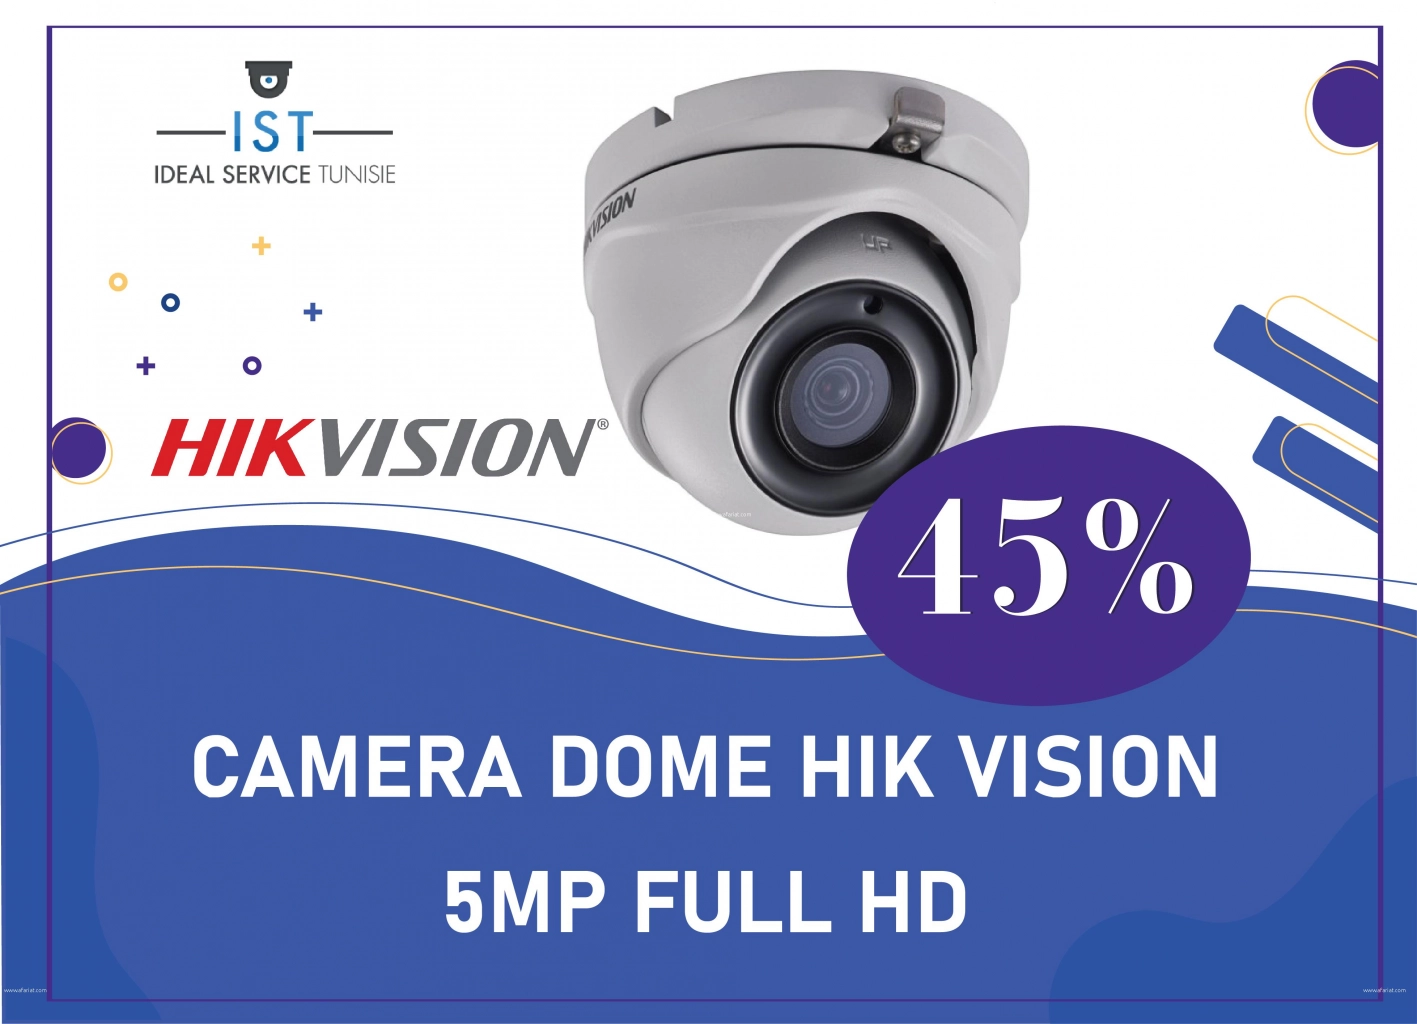 IST: CAMERA DOME HIKVISION 5MP FULL HD